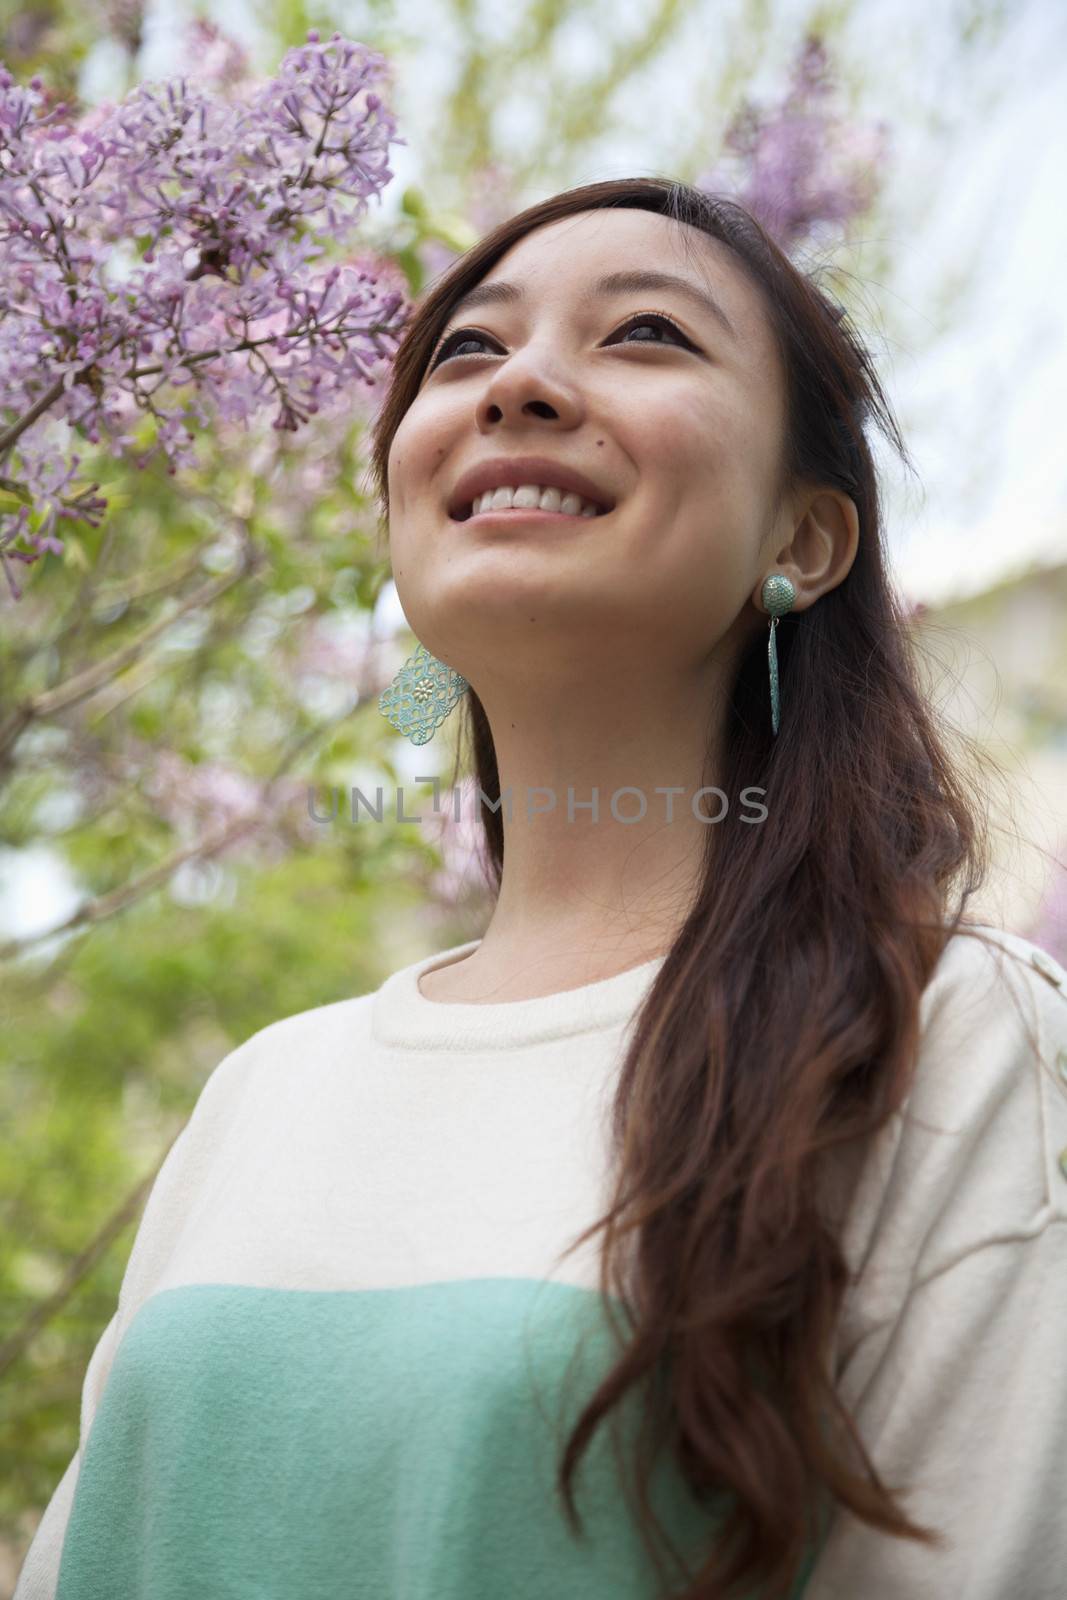 Portrait of smiling young woman with long hair outdoors in the park in springtime